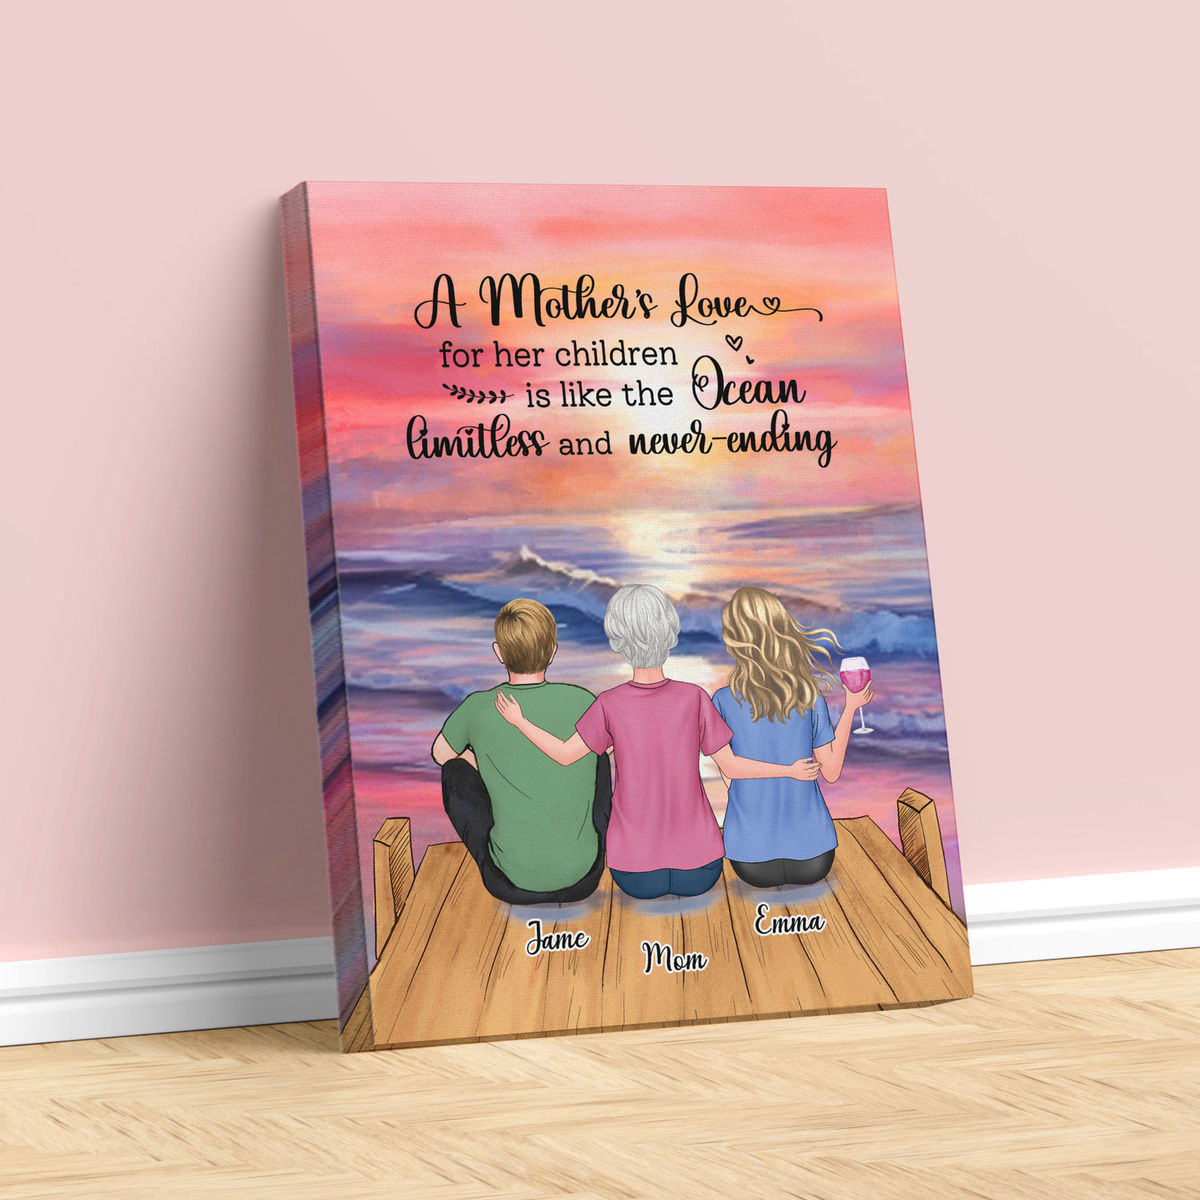 Personalized Wrapped Canvas - Christmas 2023 - Mother & Children - A mothers love for her children is like the ocean, limitless and never ending